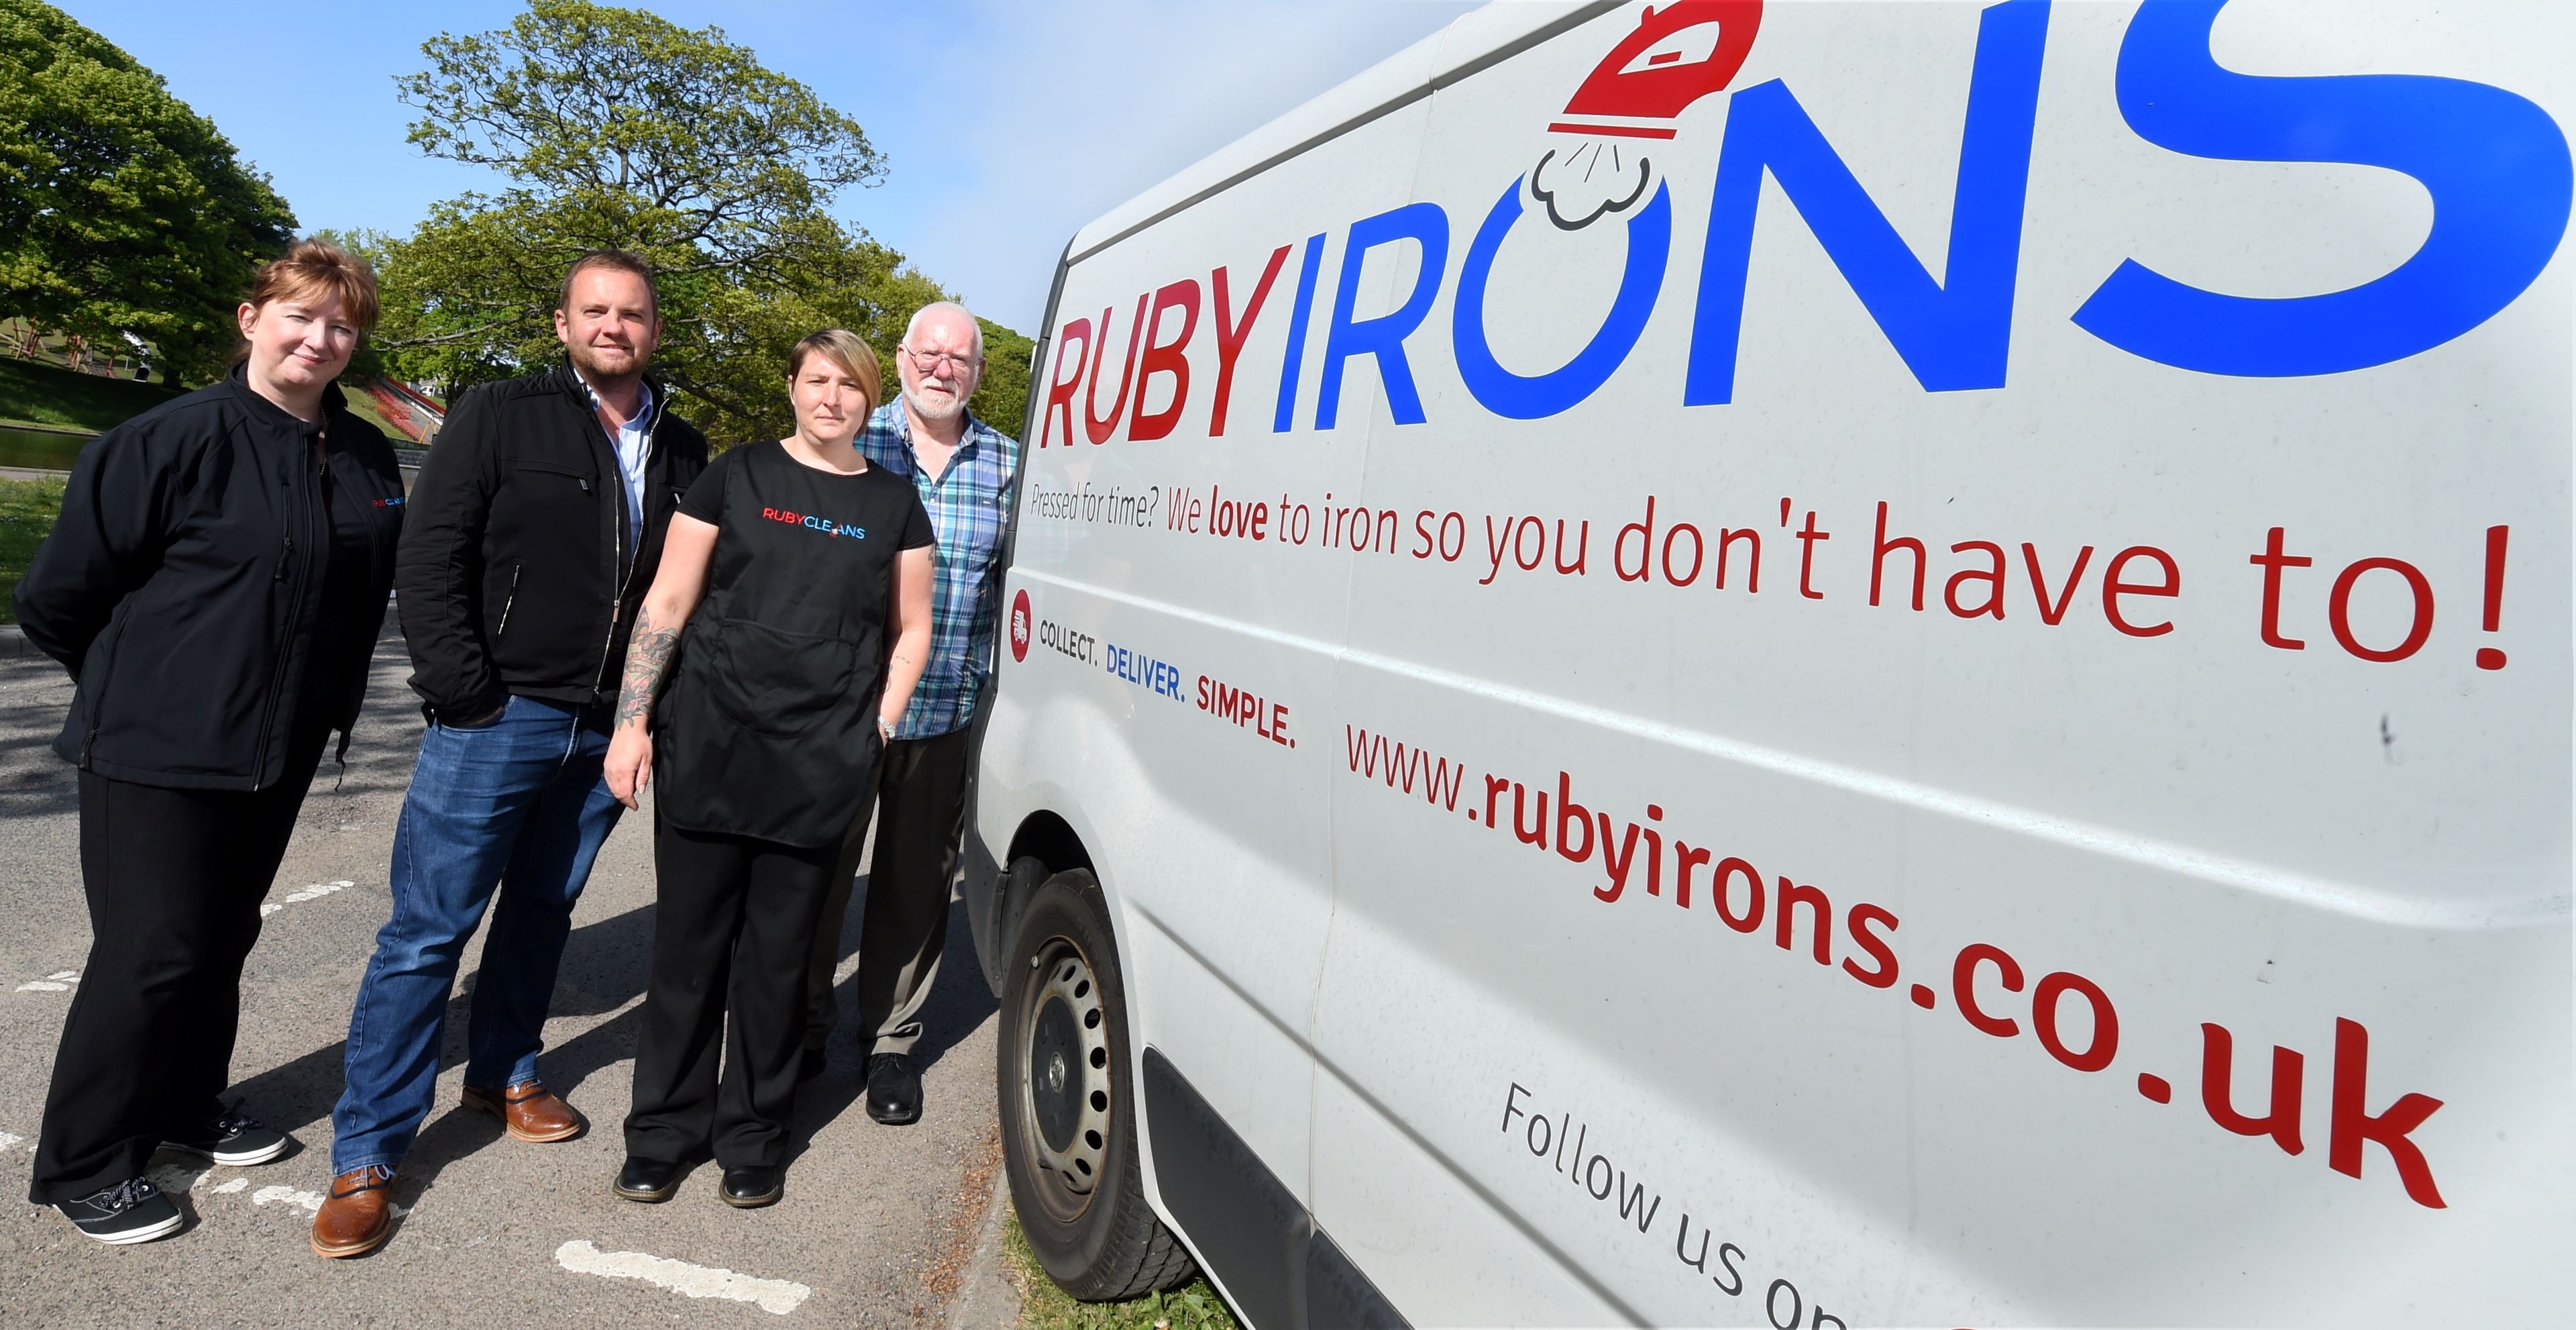 Oilman to ironman. The staff are pictured with vans at Duthie Park, Aberdeen. In the picture are from left: Fiona Ramsay, Johnny Montgomerie, Nicola Downie, and Murray Douglas.